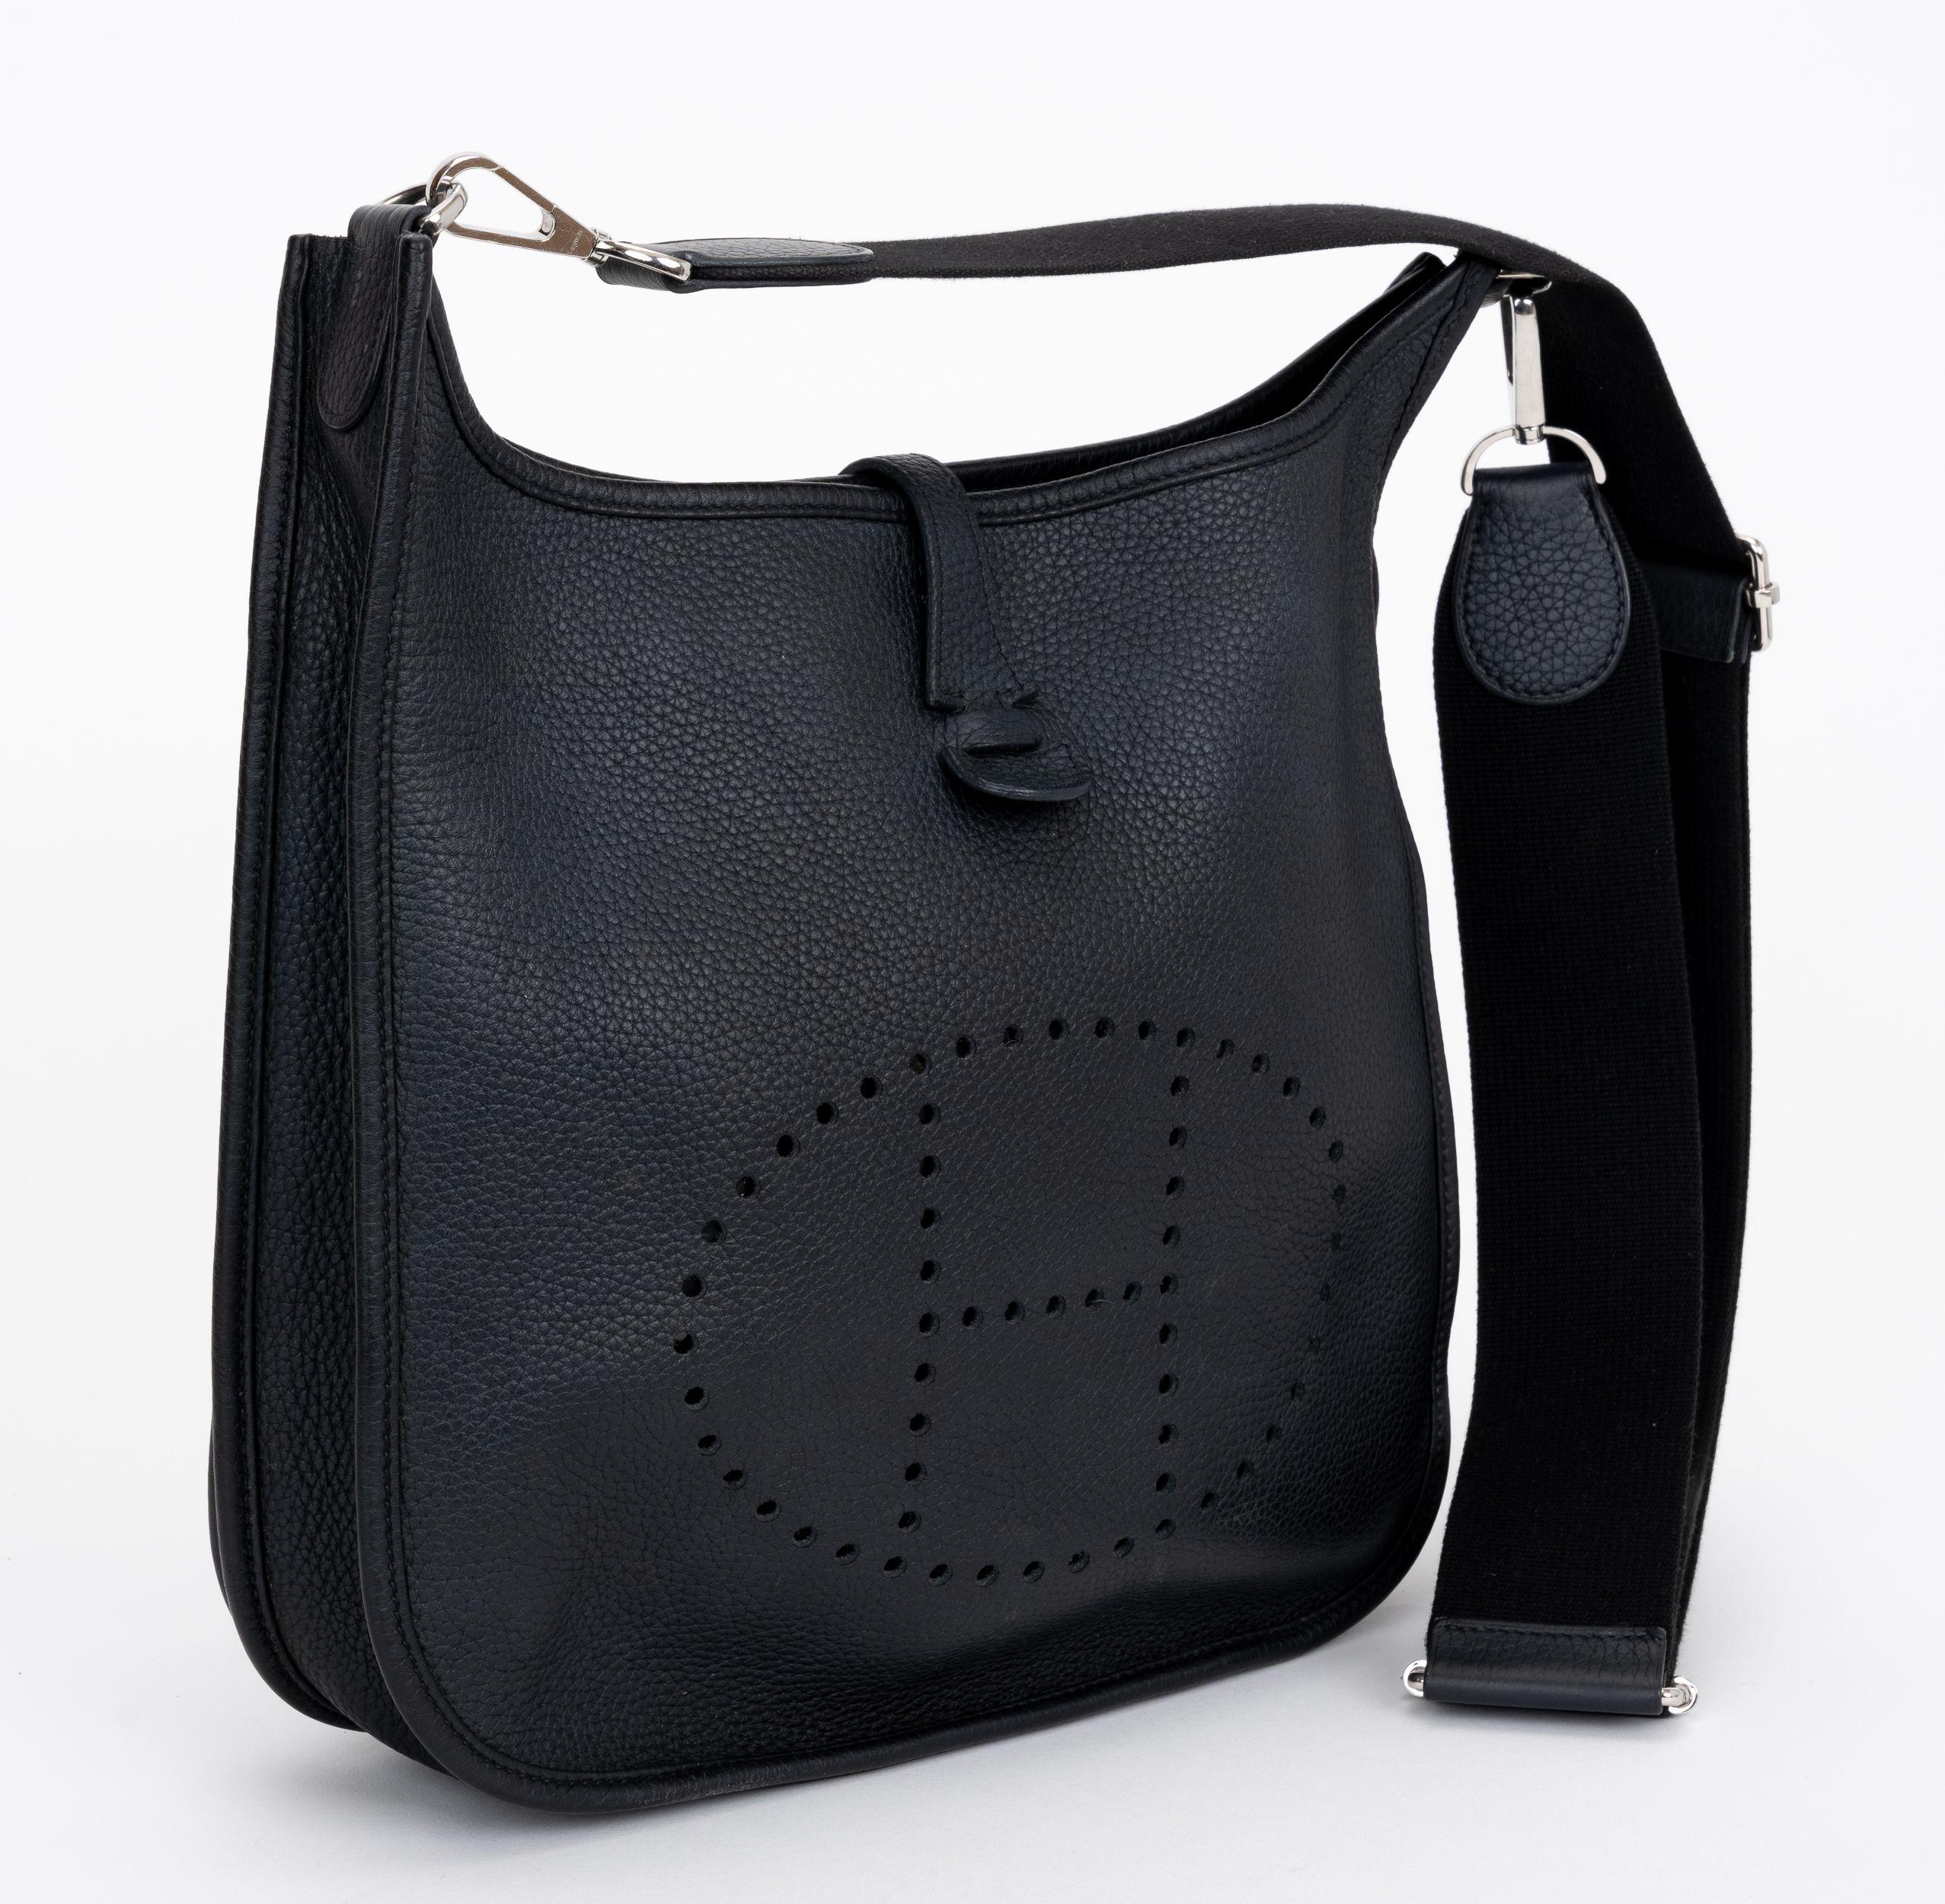 The Hermes Evelyne PM bag in black with Palladium hardware. The bag can be worn as a shoulder or cross body bag. Date stamp Z. Excellent condition, minor wear inside. Comes with original dust cover.